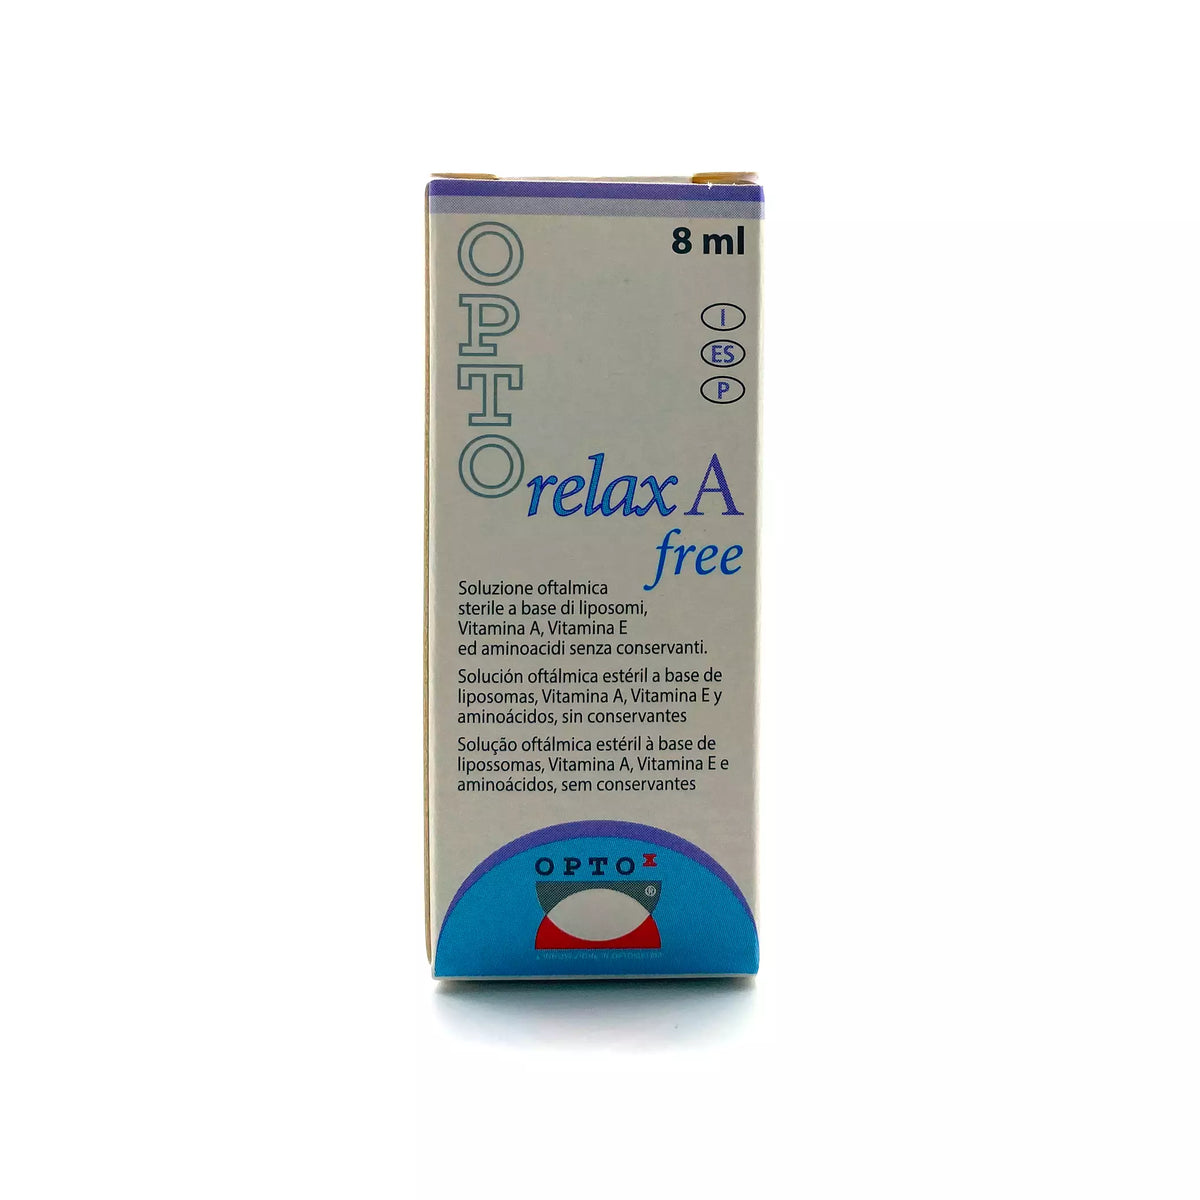 OPTOrelax A free - Artificial tears